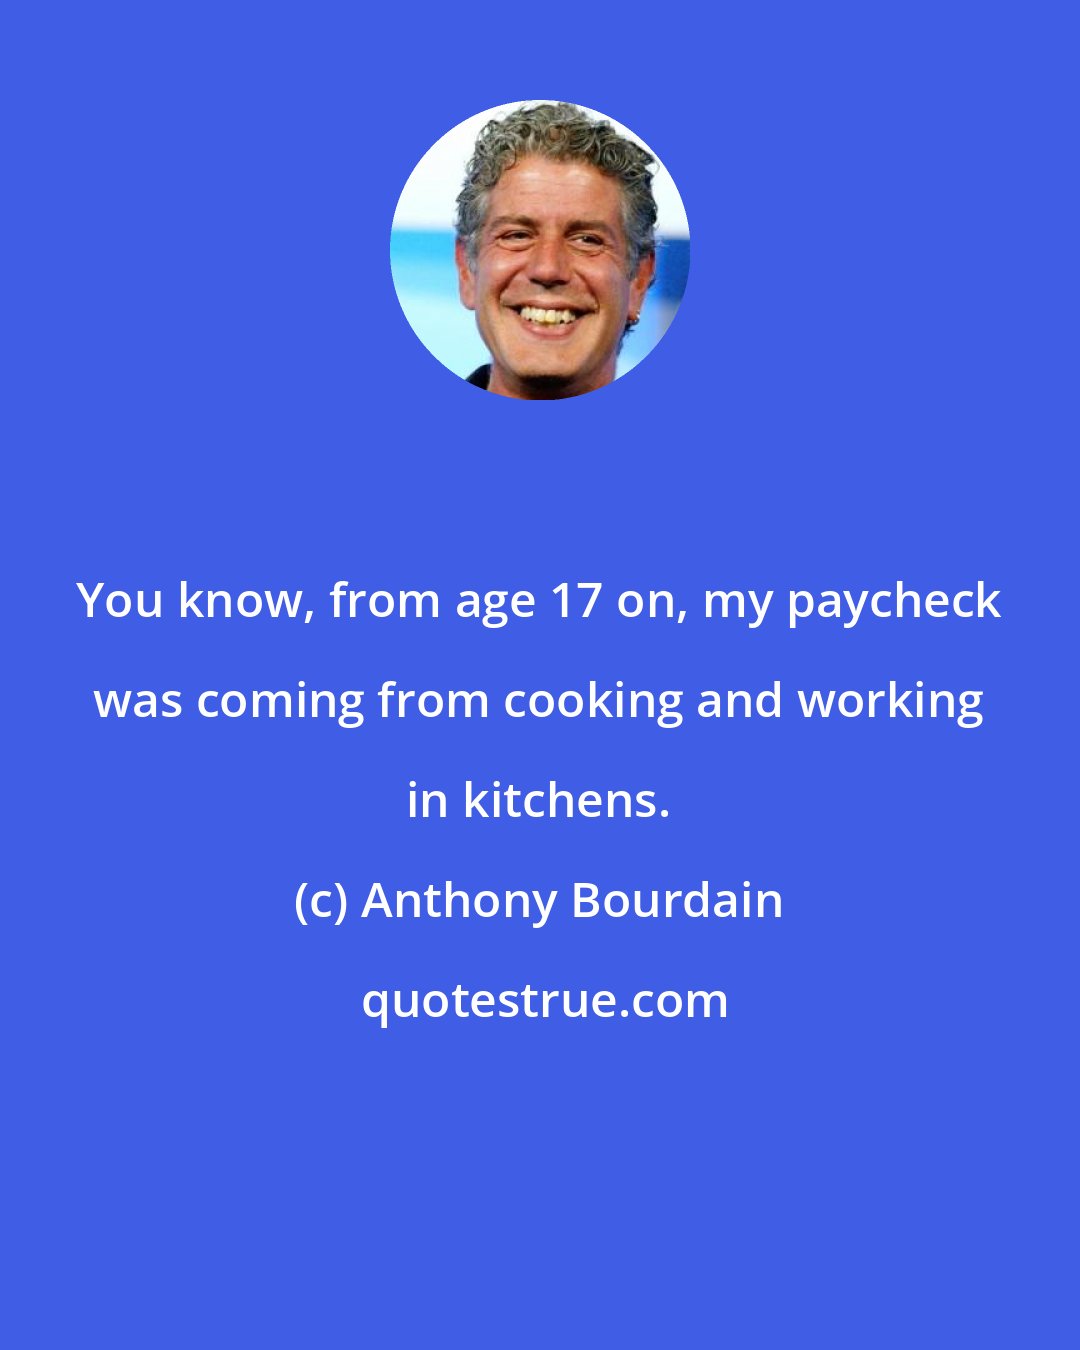 Anthony Bourdain: You know, from age 17 on, my paycheck was coming from cooking and working in kitchens.